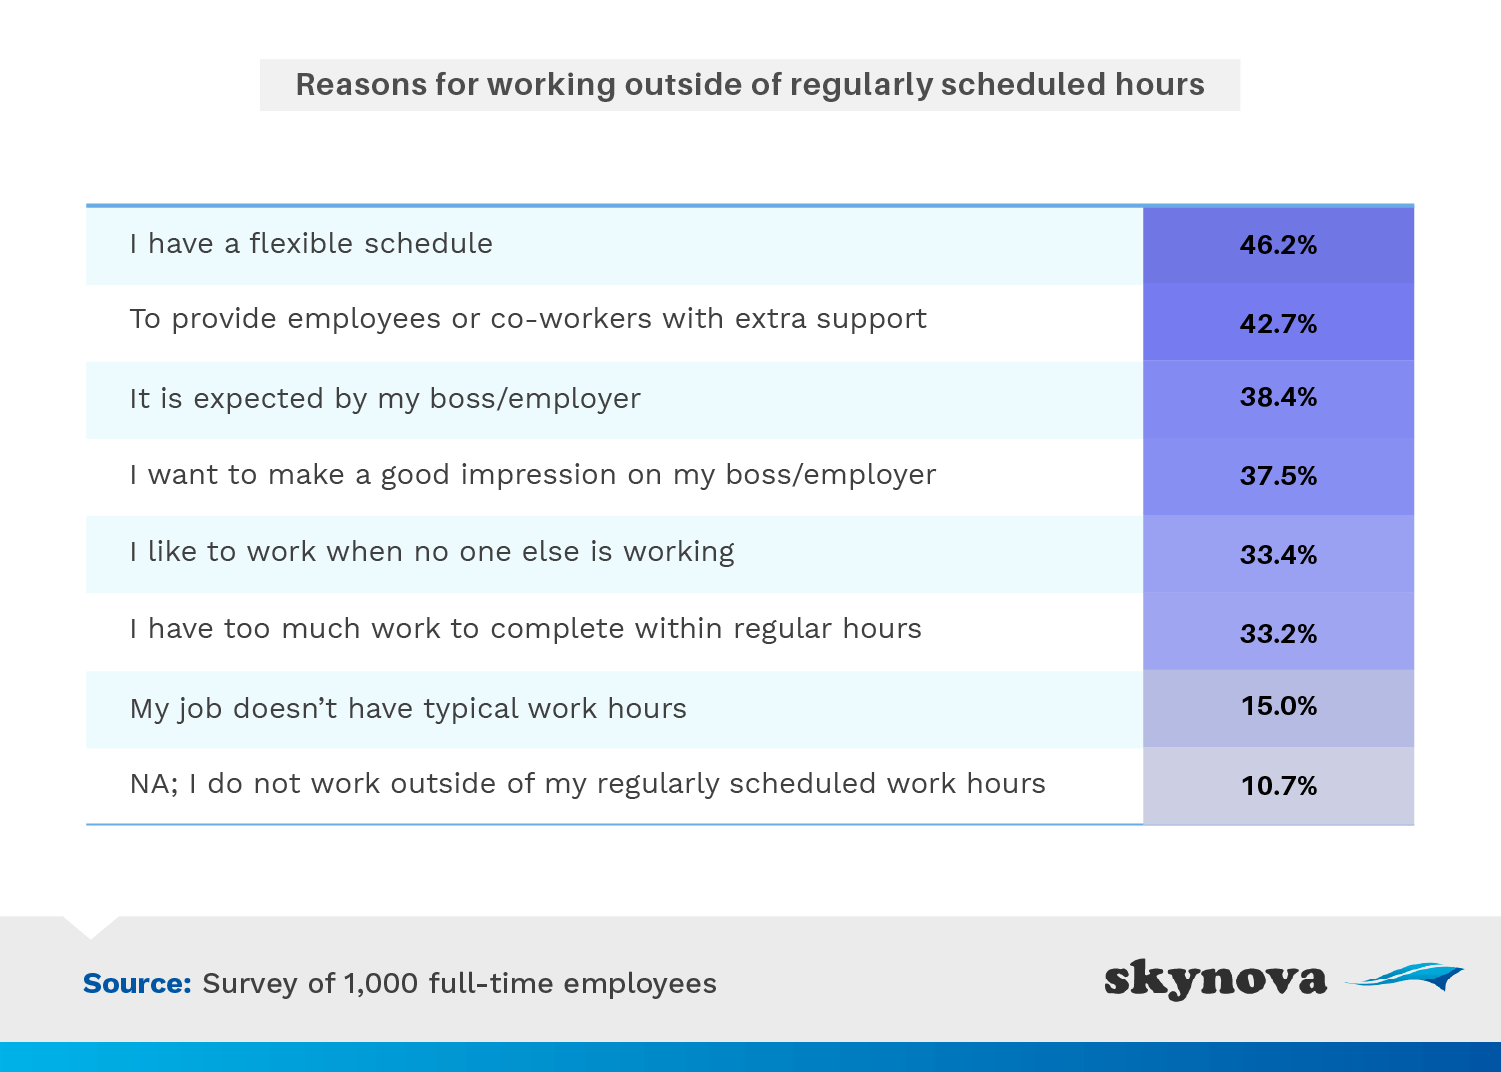 Reasons for working outside schedule